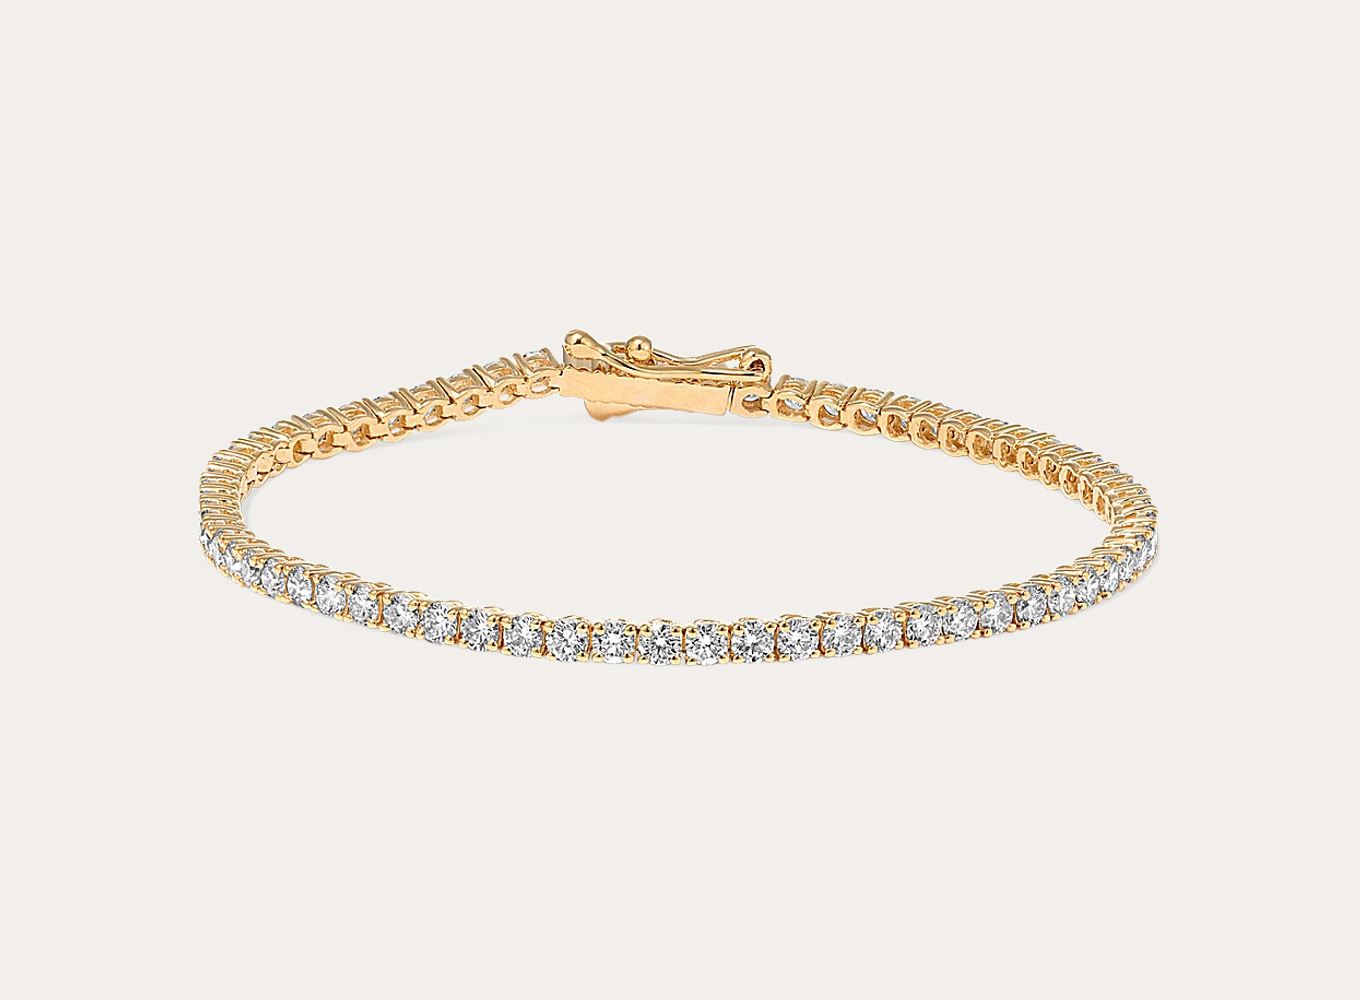 2 1/2 Diamond Tennis Bracelet (8 in) Leave them speechless with this natural diamond tennis bracelet. Set in bright 14-karat yellow gold, the hand-matched diamonds will sparkle from across the room. A secure box clasp and figure-eight safety latch offer worry-free wear.